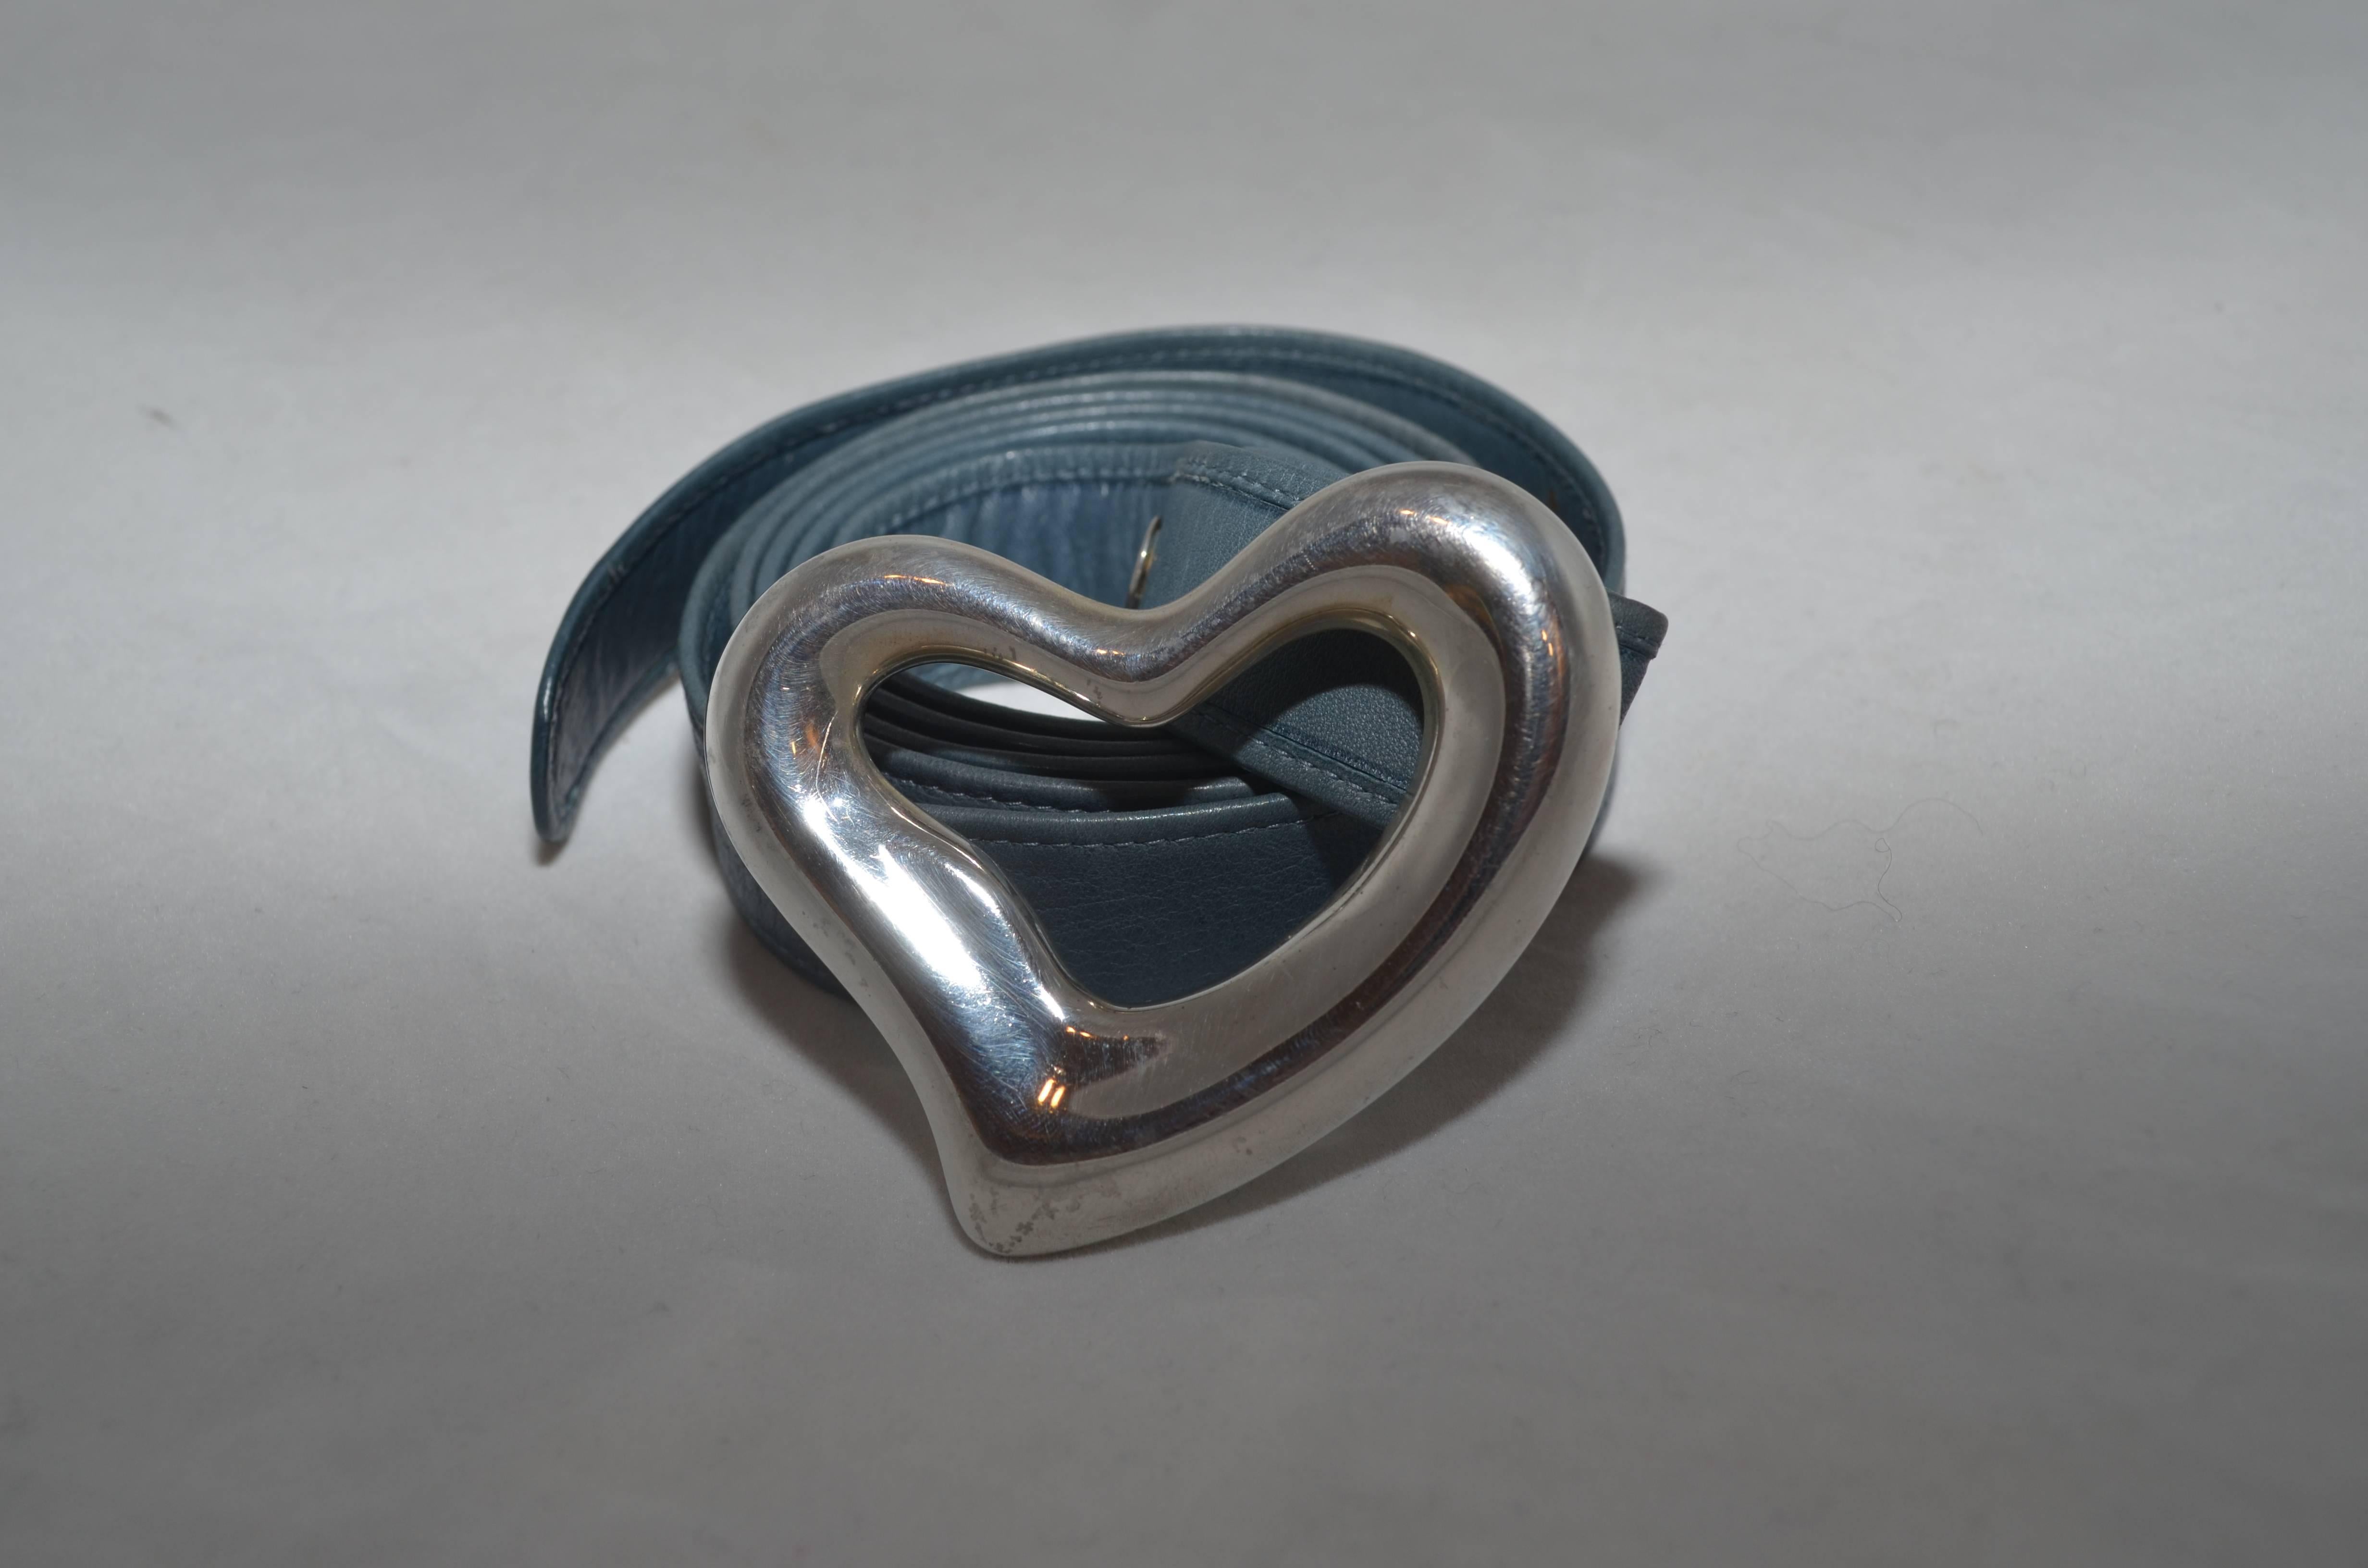 Tiffany & Co Elsa Peretti 1975 Sterling Silver Open Heart Buckle Leather Belt

Tiffany & Co. Elsa Peretti sterling silver open heart buckle and a blue leather belt strap that is 2 centimeters wide, and is 43 inches long. Silver heart is stamped